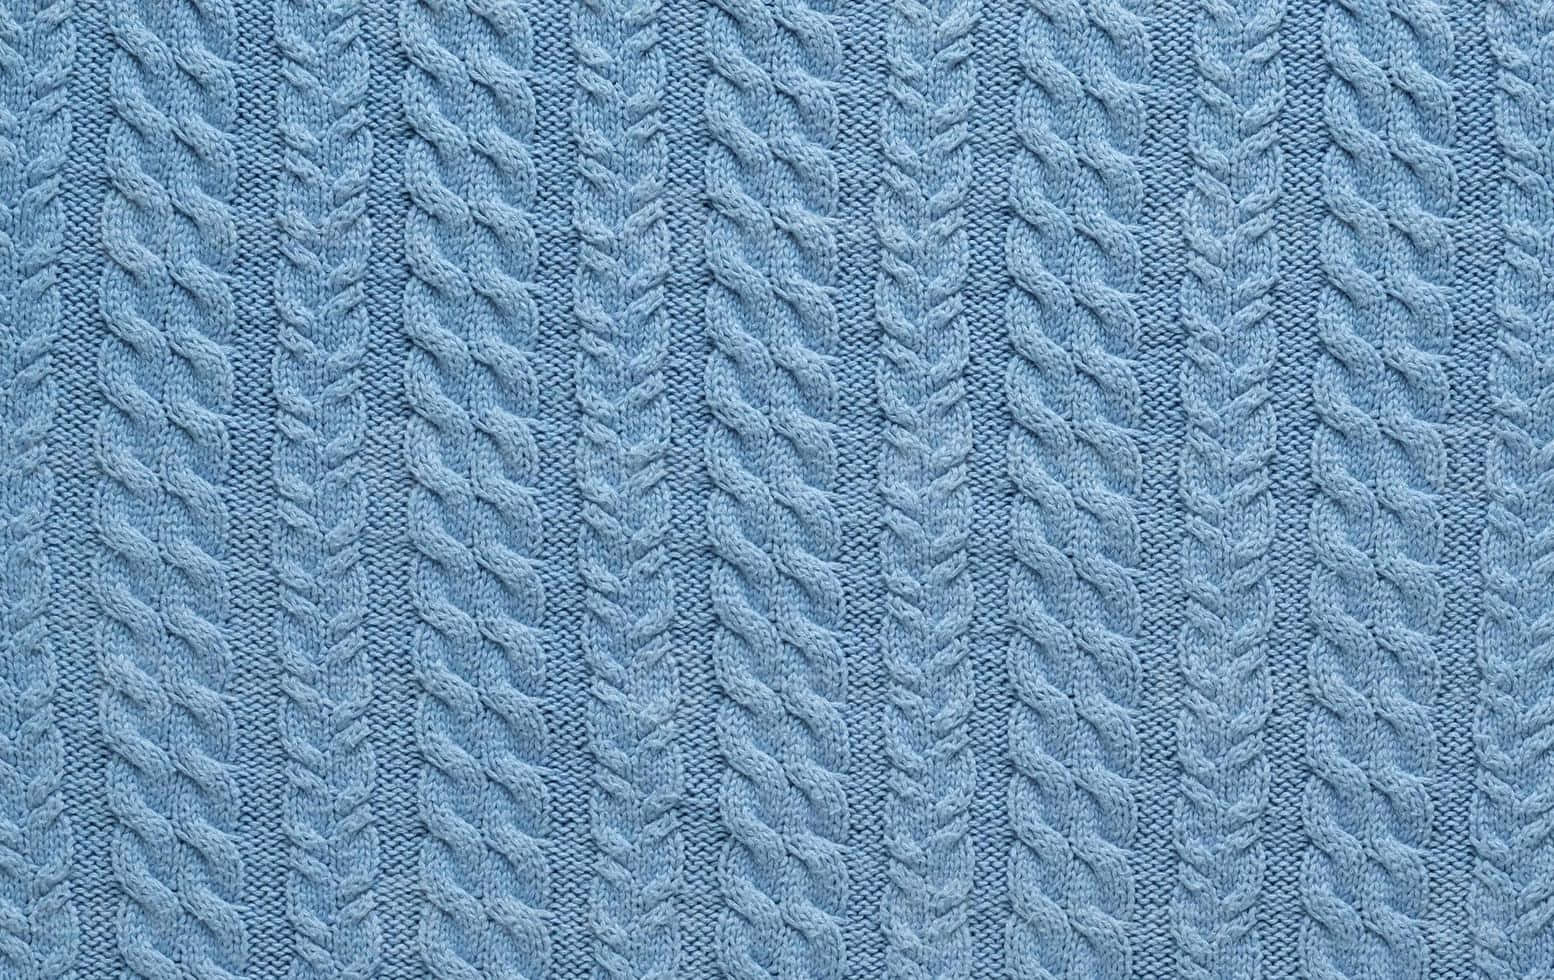 Intricate Knitted Wool Texture Wallpaper